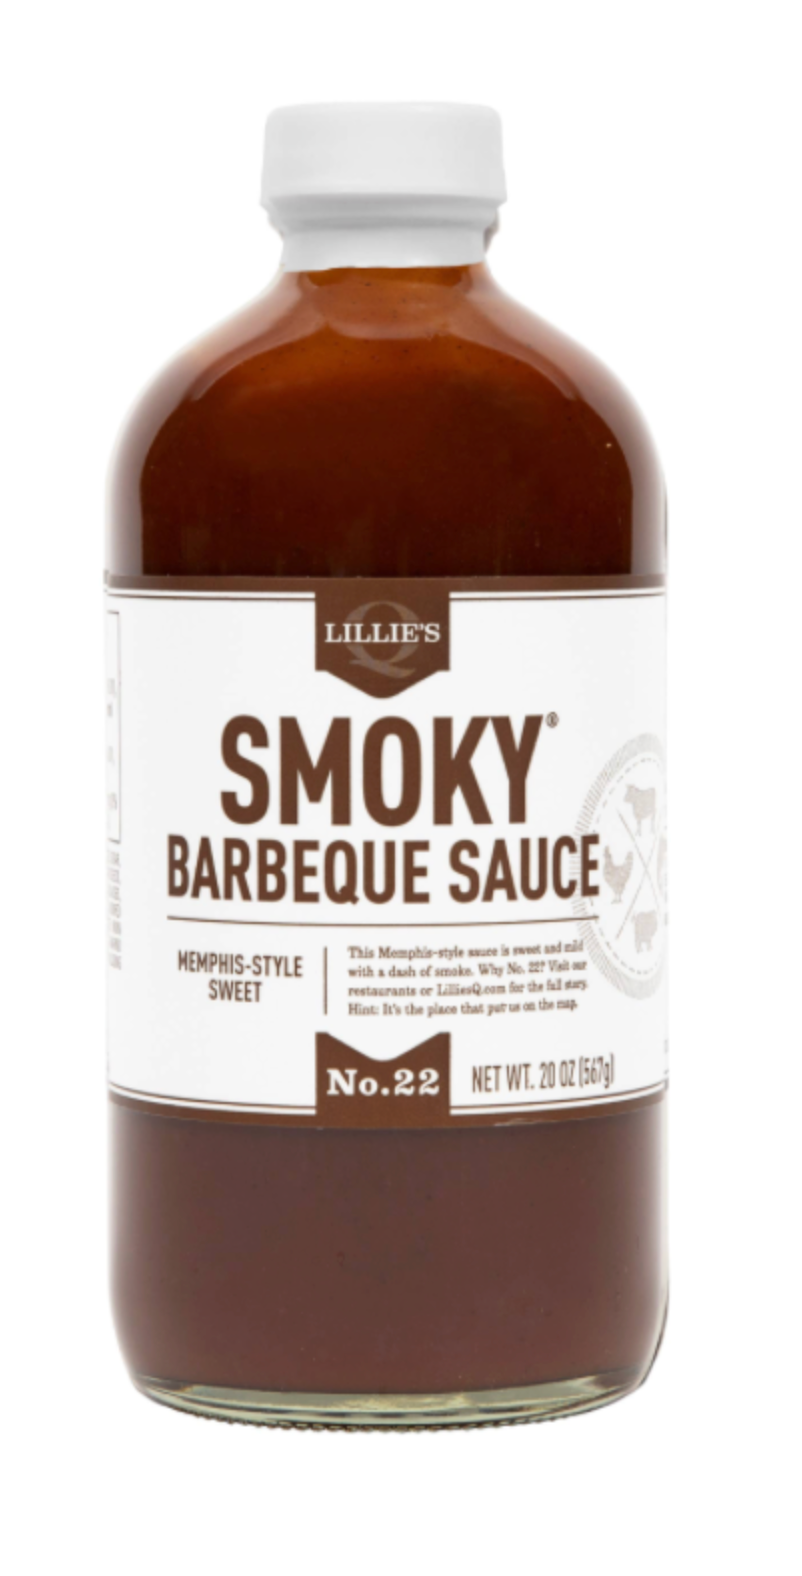 Smoky Barbeque Sauce